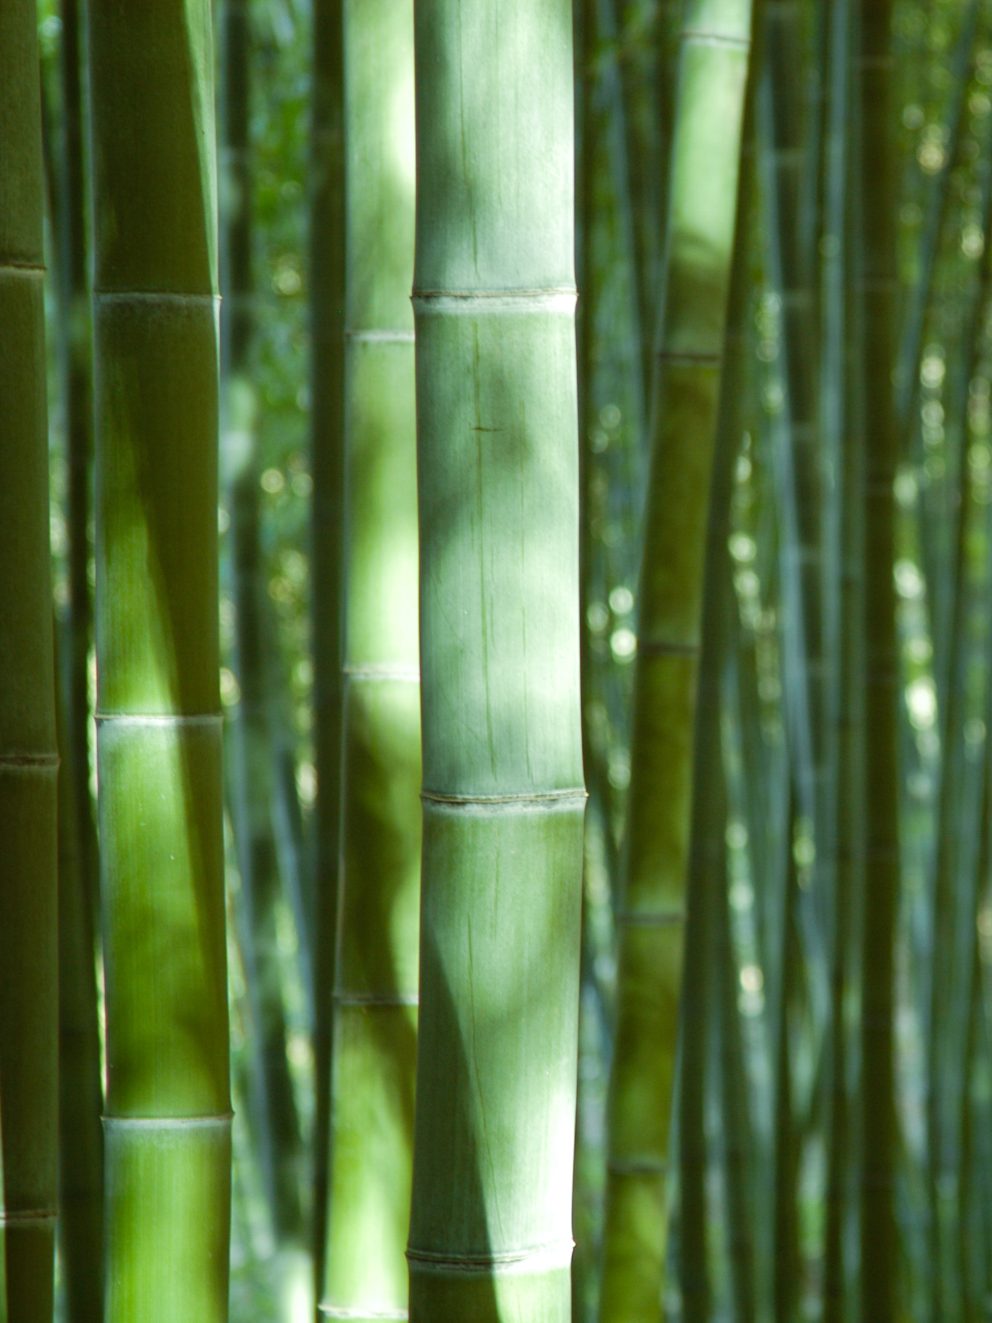 A fantastic choice of bamboo. I settled on this one as I want it to spread and look full. It arrived as indicated and well wrapped. 